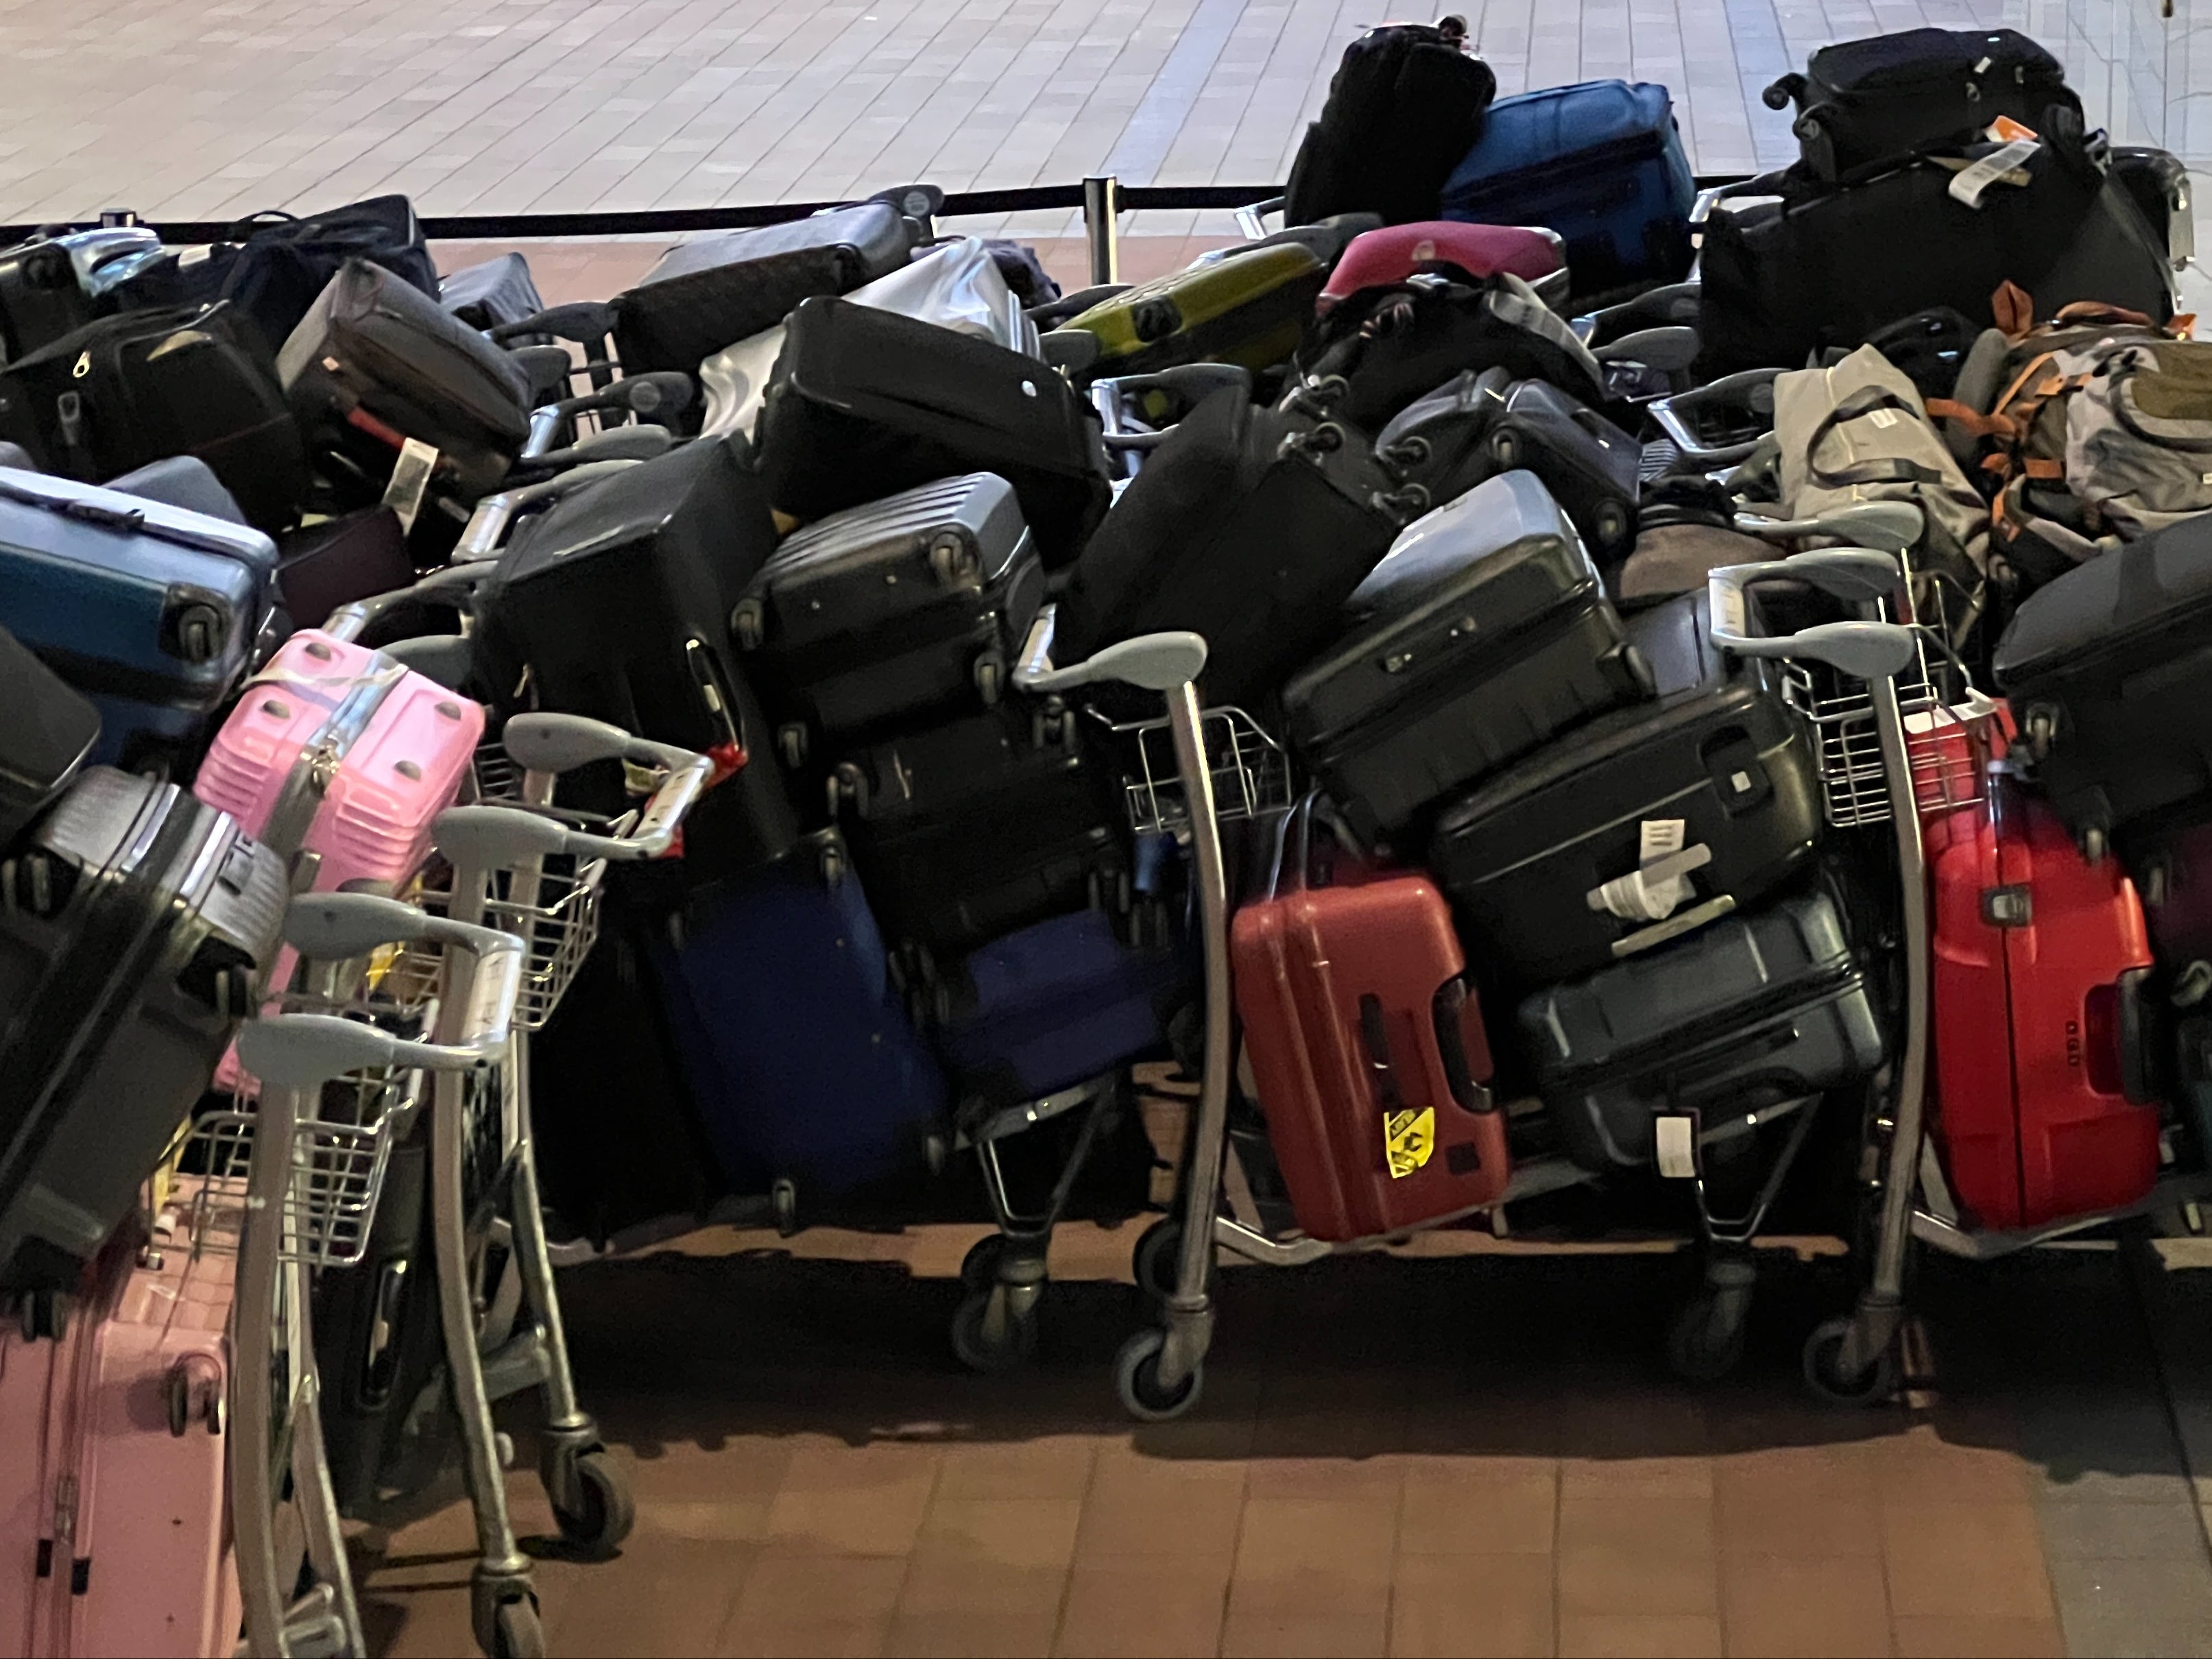 Case chase: bags at Heathrow airport